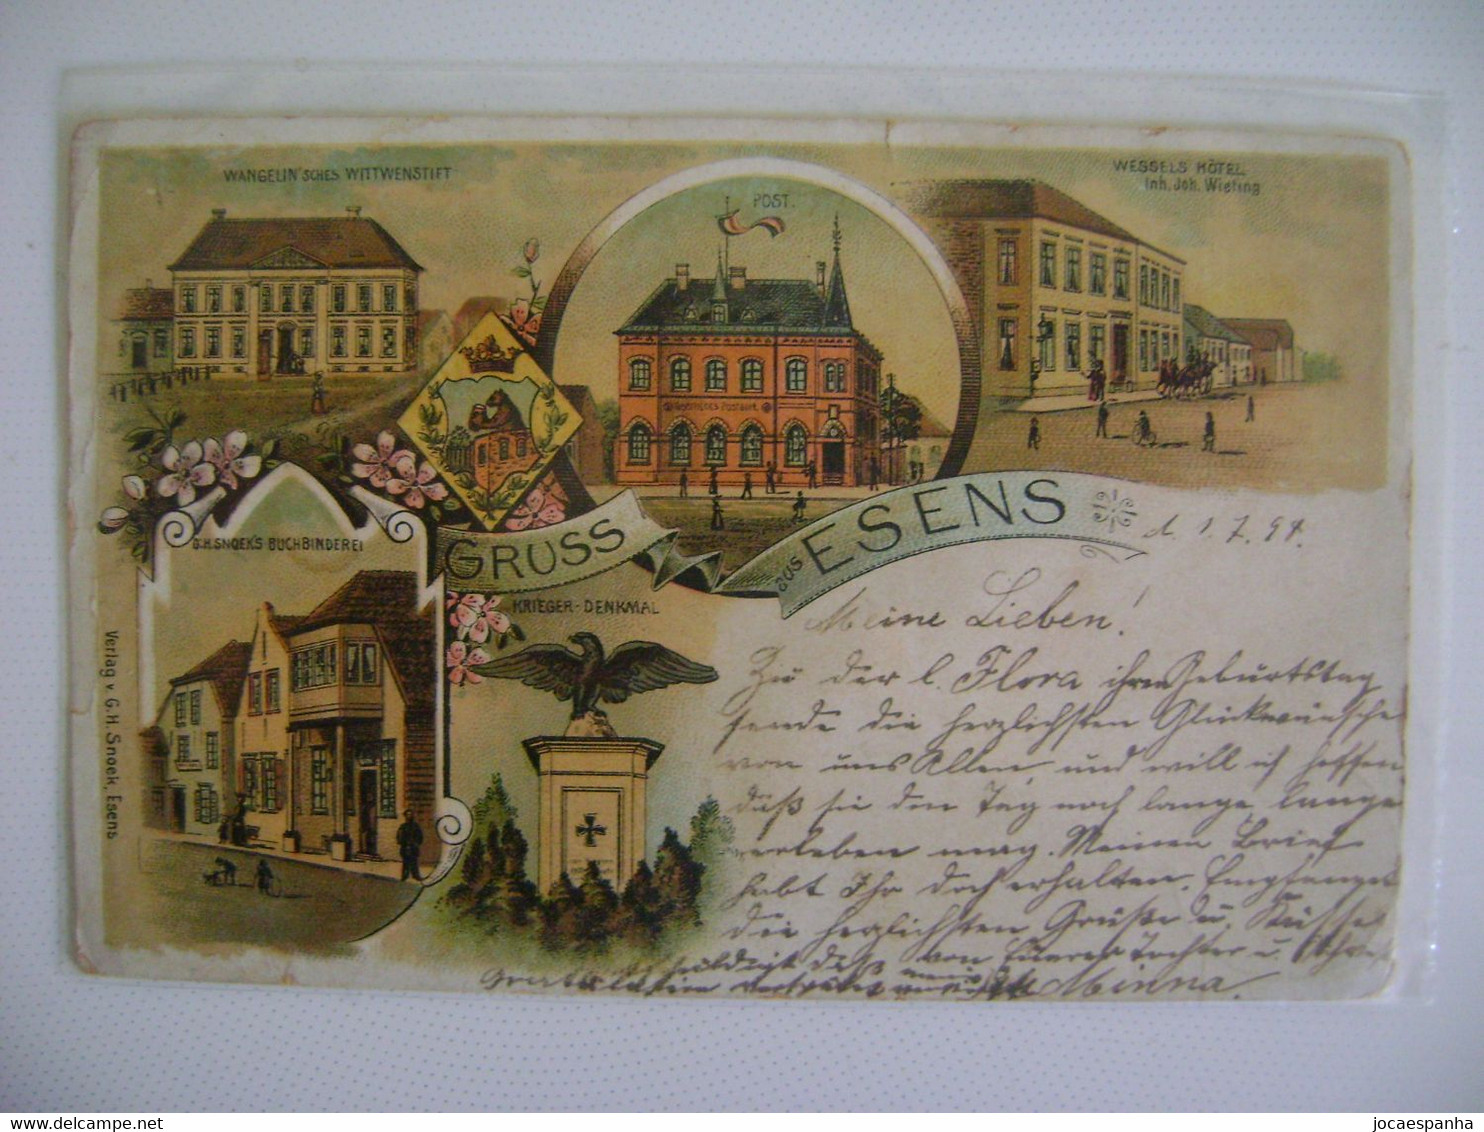 GERMANY - GRUSS AUS ESENS COLORFUL POSTCARD SENT IN 1898 IN THE STATE - Esens